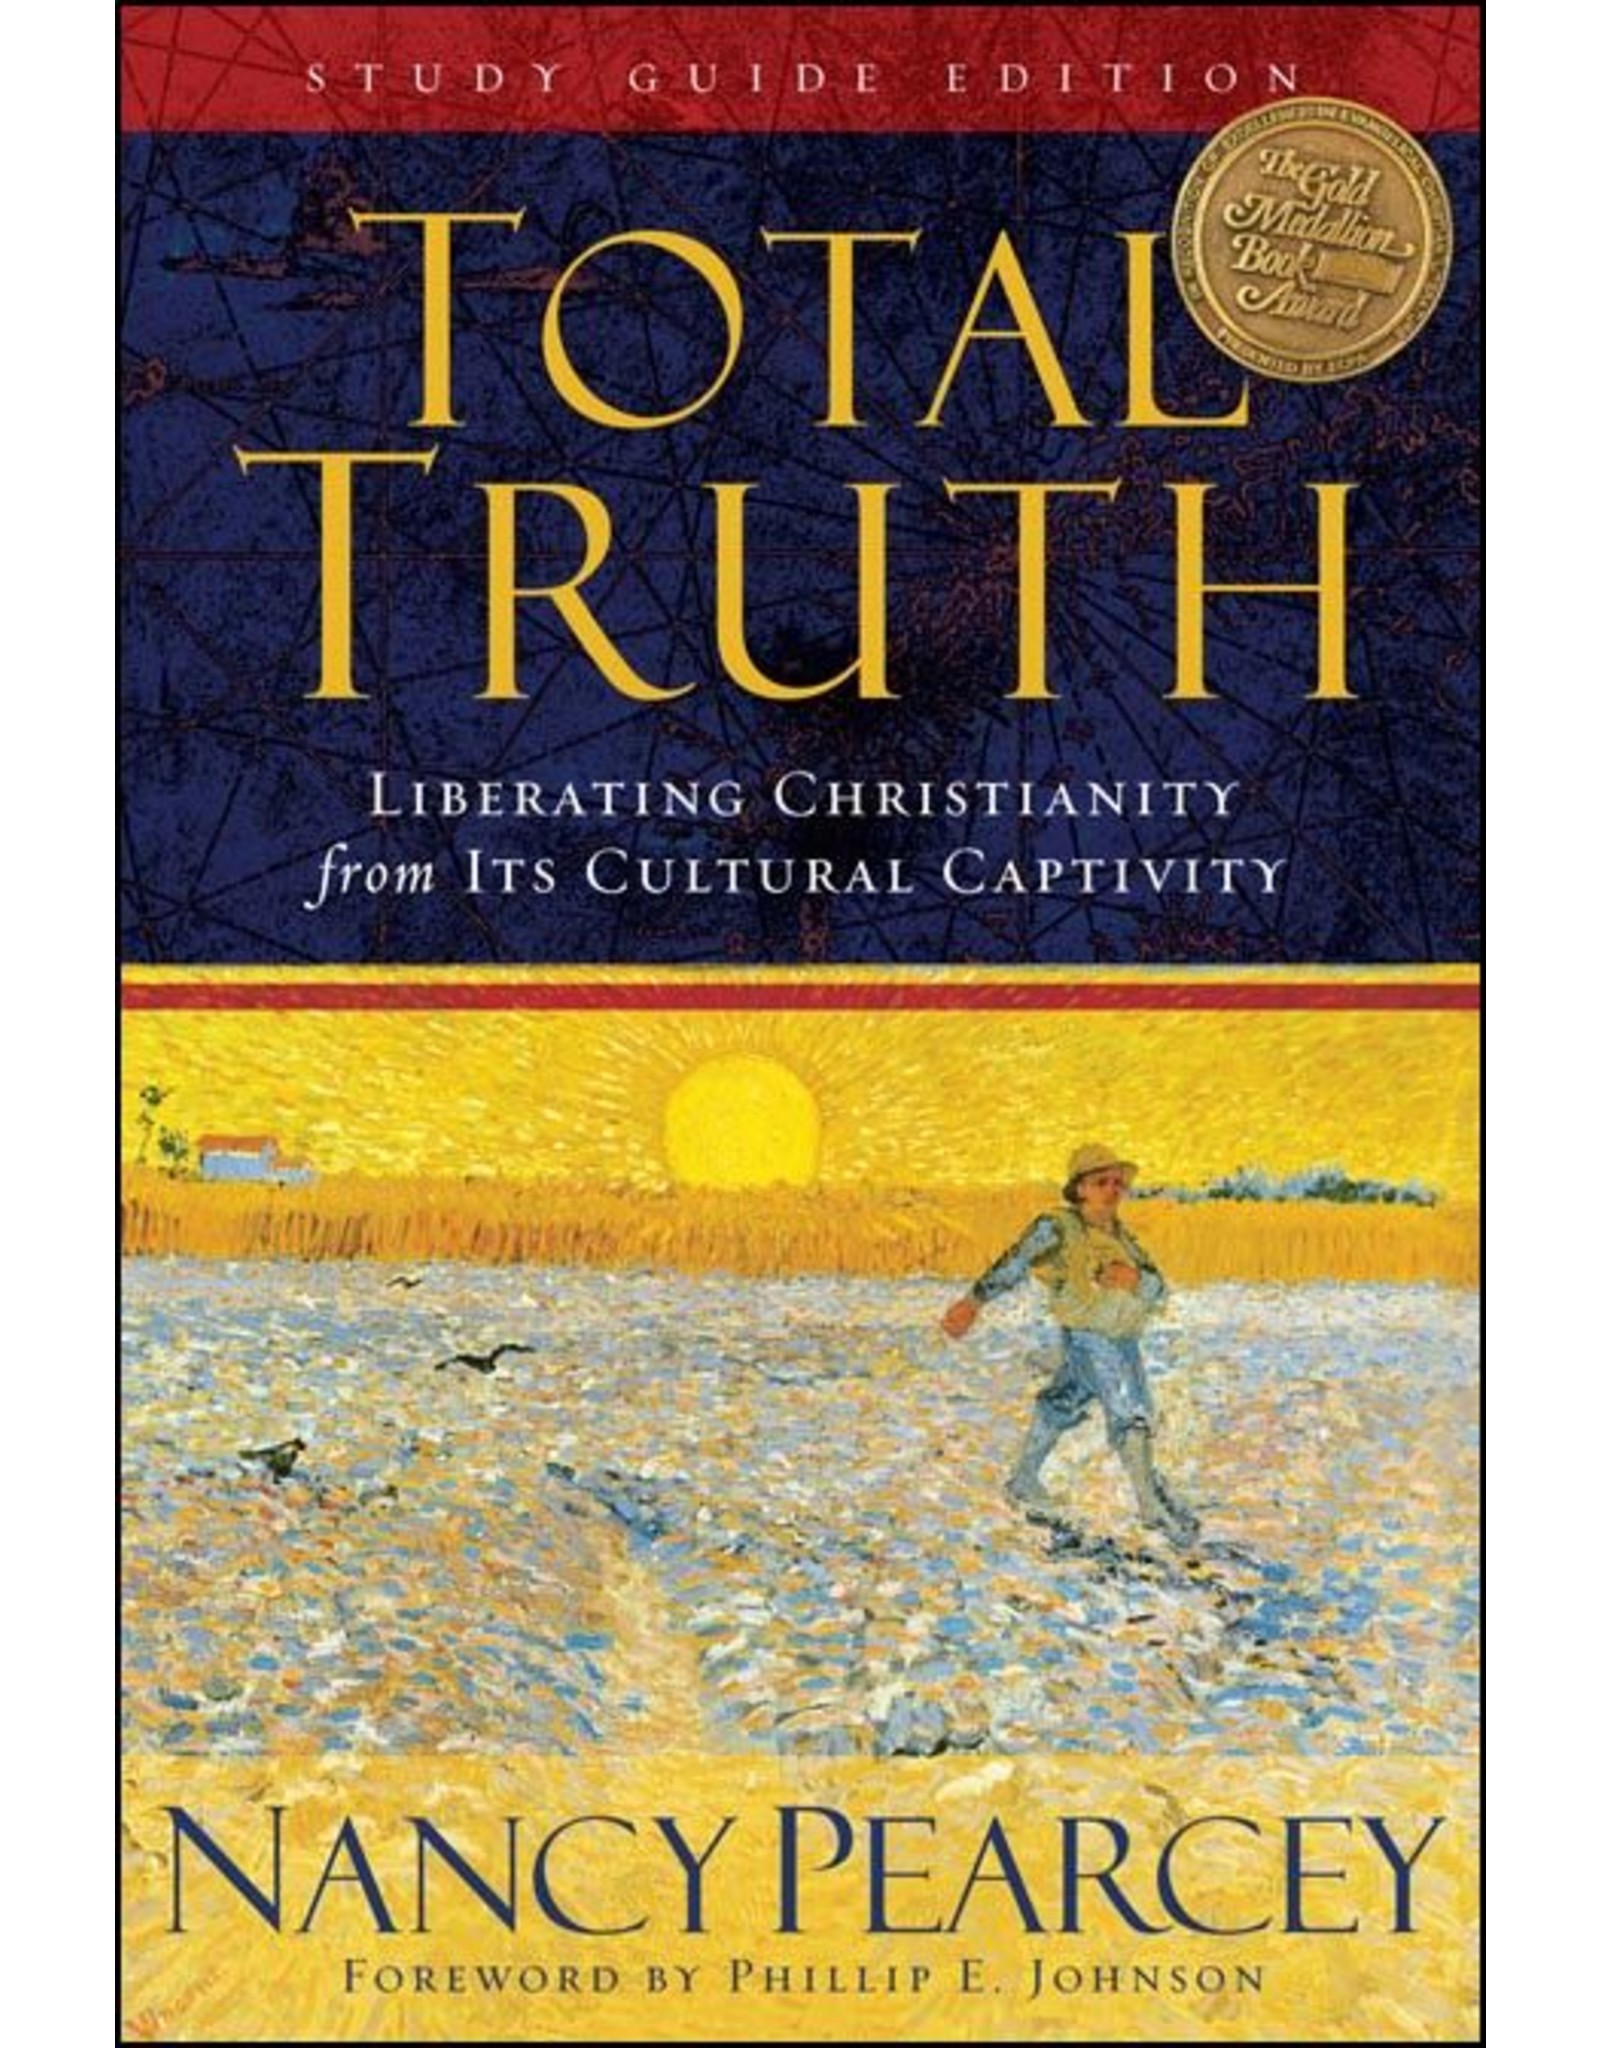 Crossway / Good News Total Truth (Paperback with Study Guide)